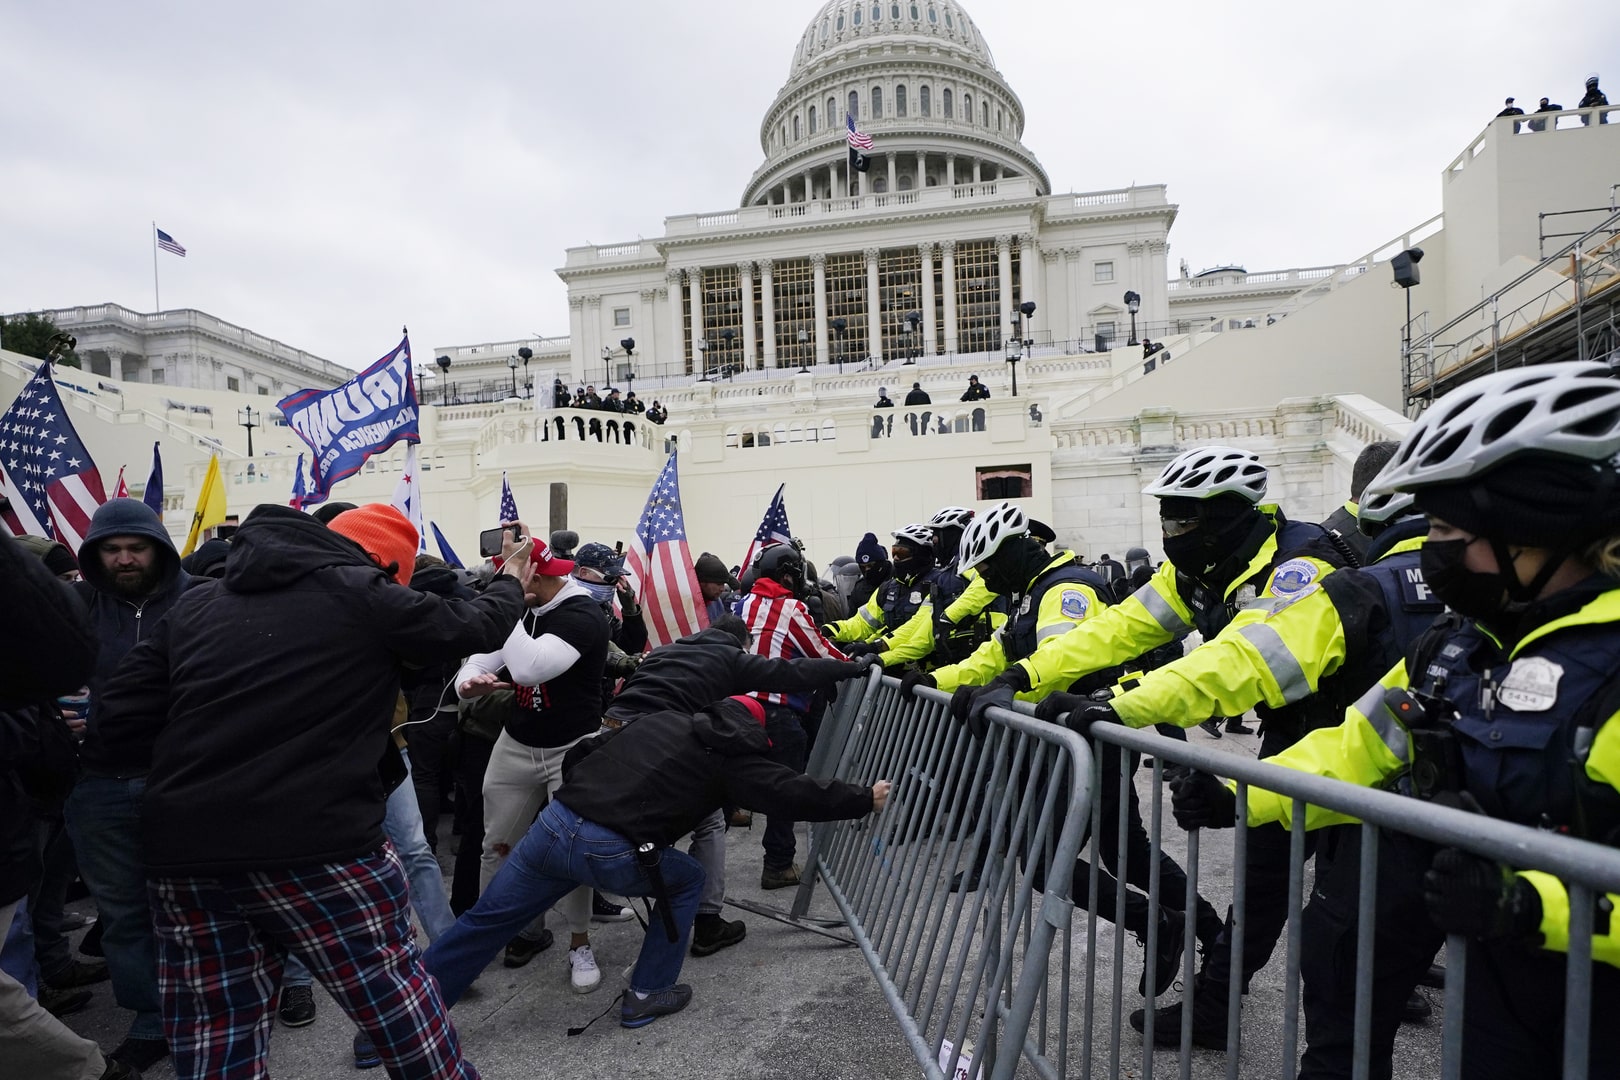 January 6, 2021: Supporters of Donald Trump, wanting to block the certification of the Electoral College vote in favor of Joe Biden, force the entrances to the Capitol. 800 of them manage to get in. Four demonstrators and a policeman perished during the clashes. PA